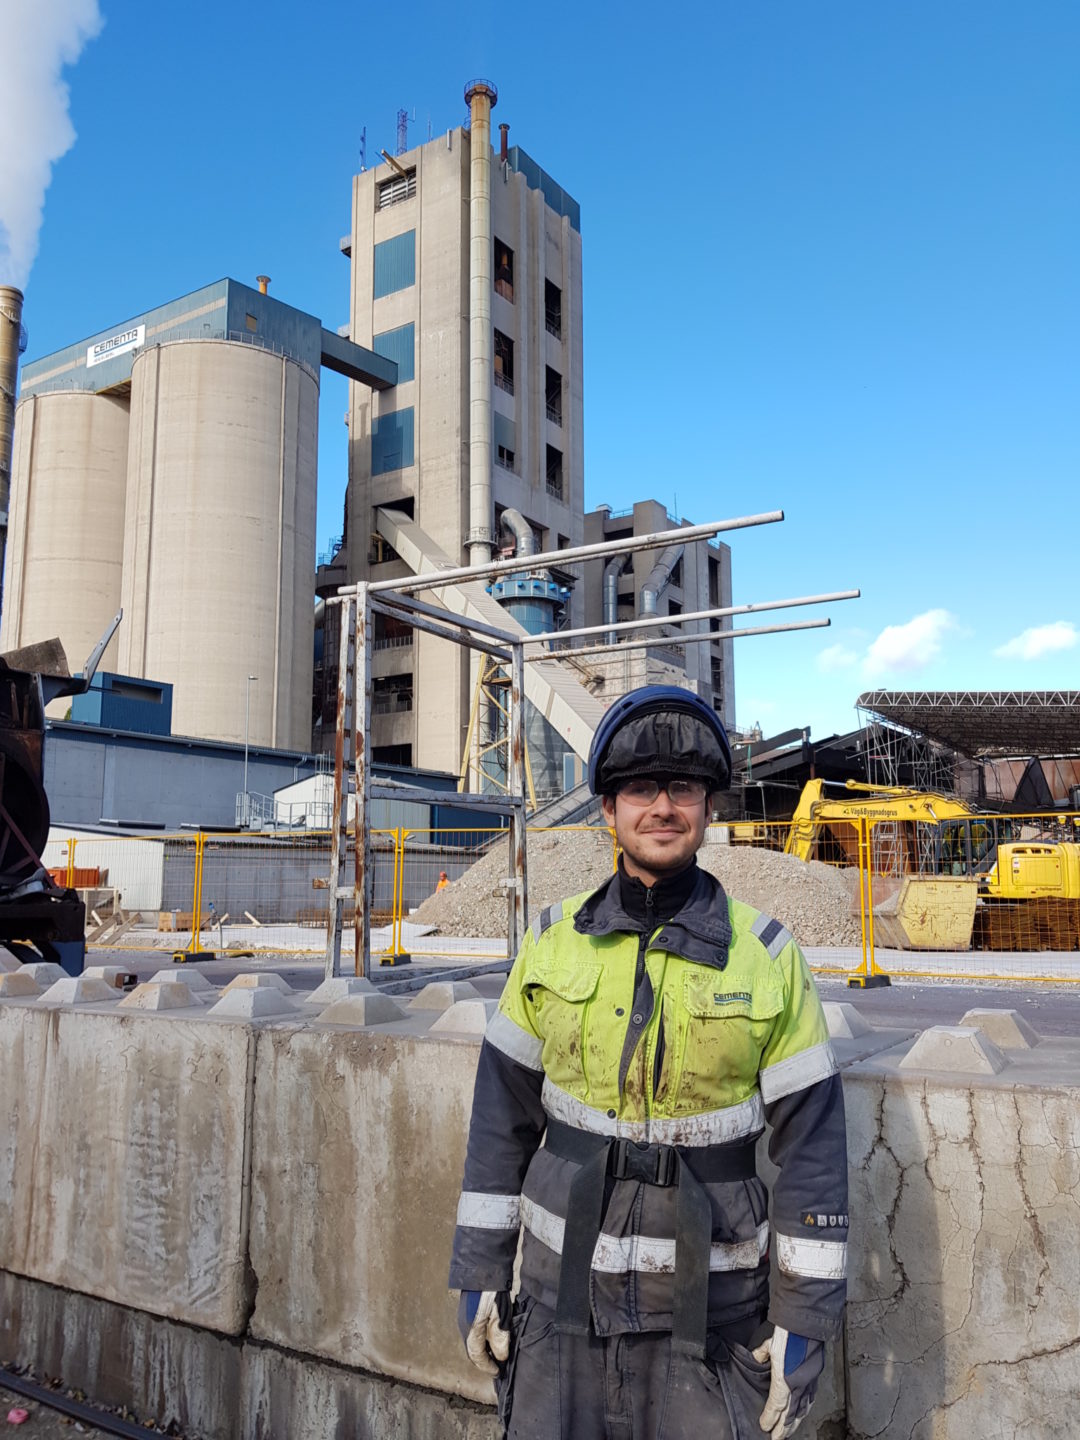 Christian Roman posing in front of the Cementa factory